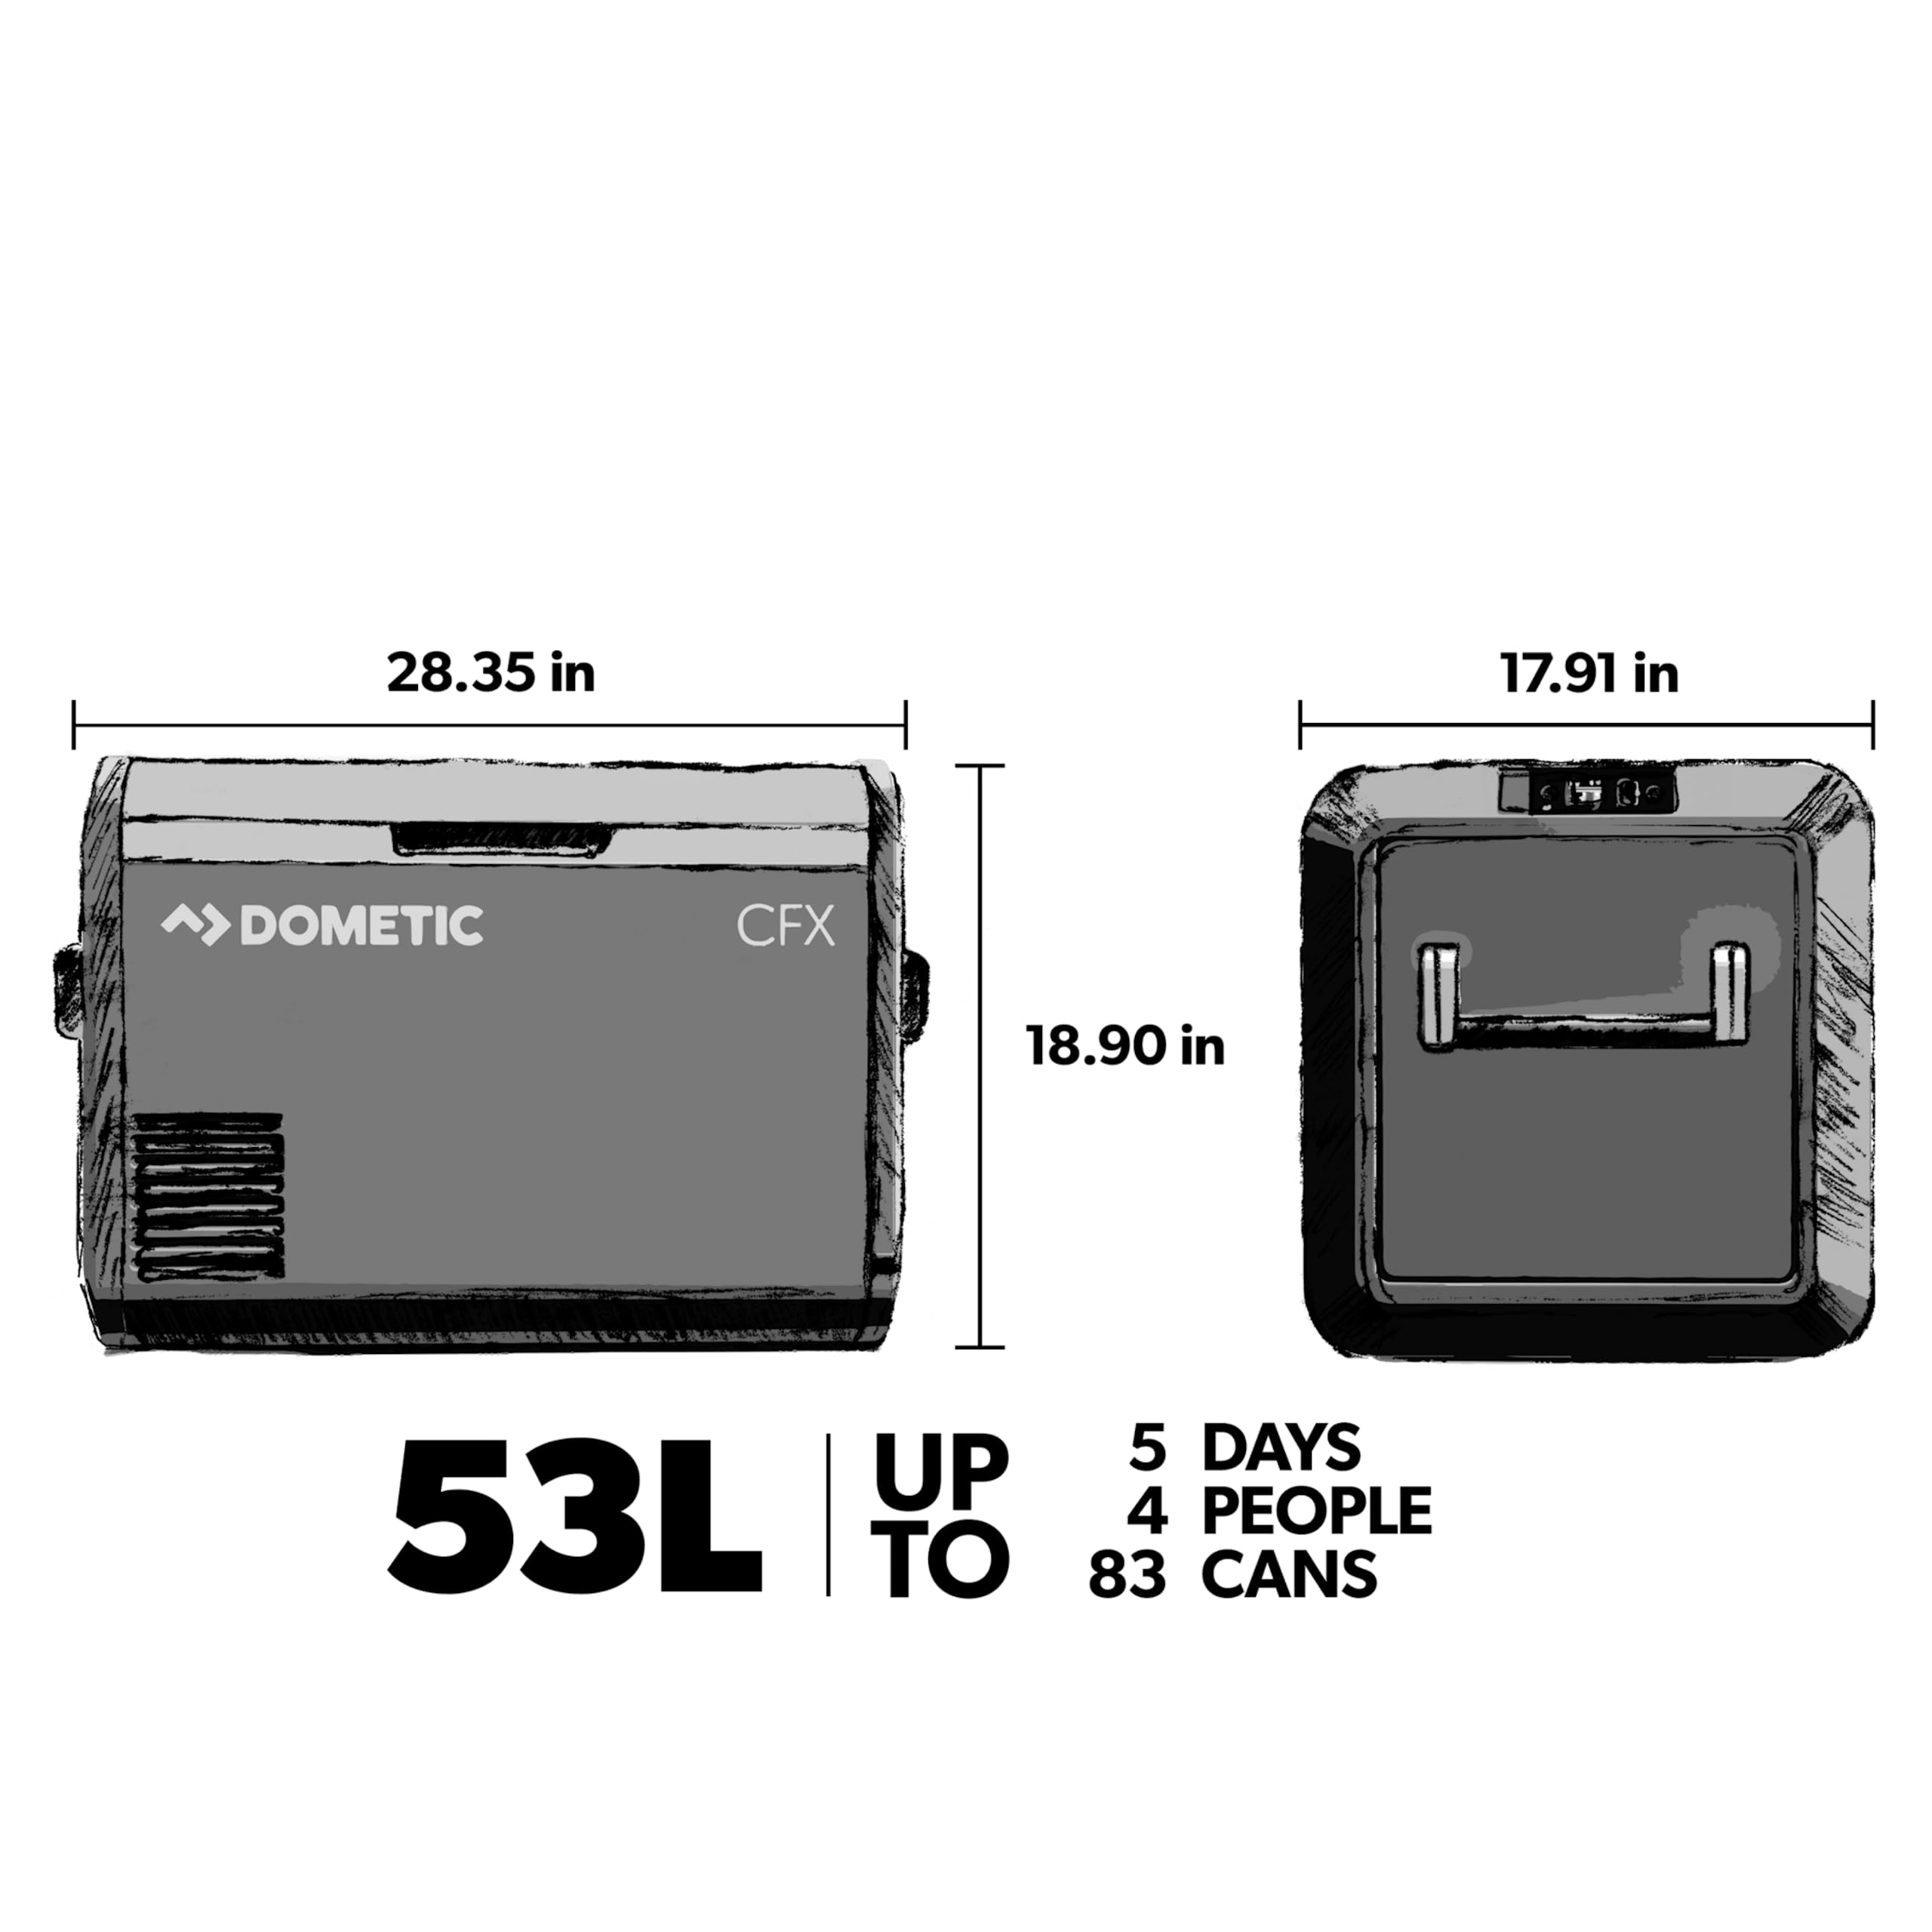 DOMETIC CFX3 55-Liter Portable Refrigerator and Freezer with ICE MAKER, Powered by AC/DC or Solar